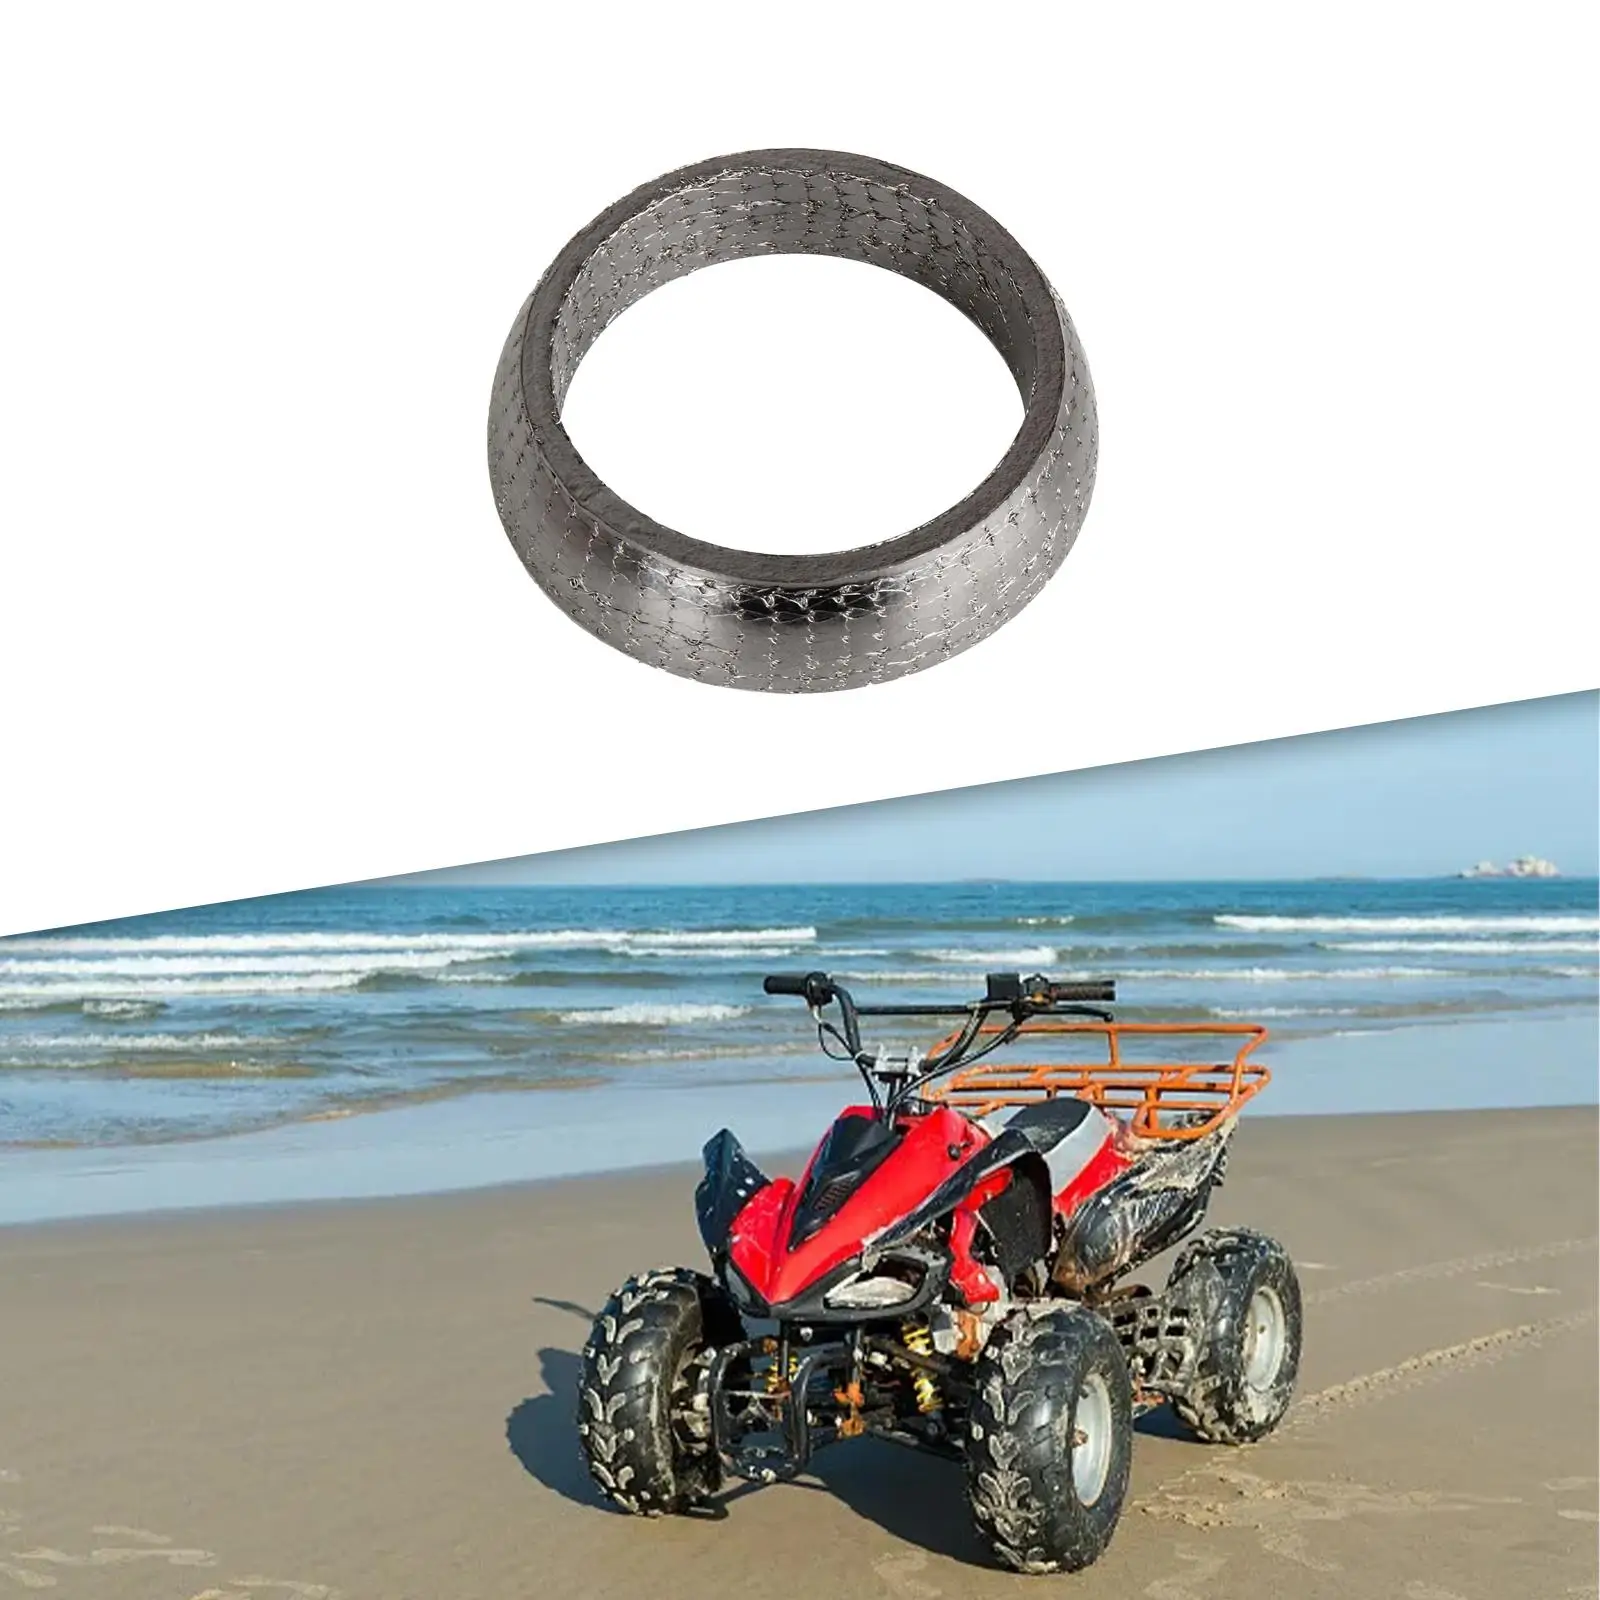 Graphite Gasket to Manifold Adapter Durable for ATV UTV Motorcycles